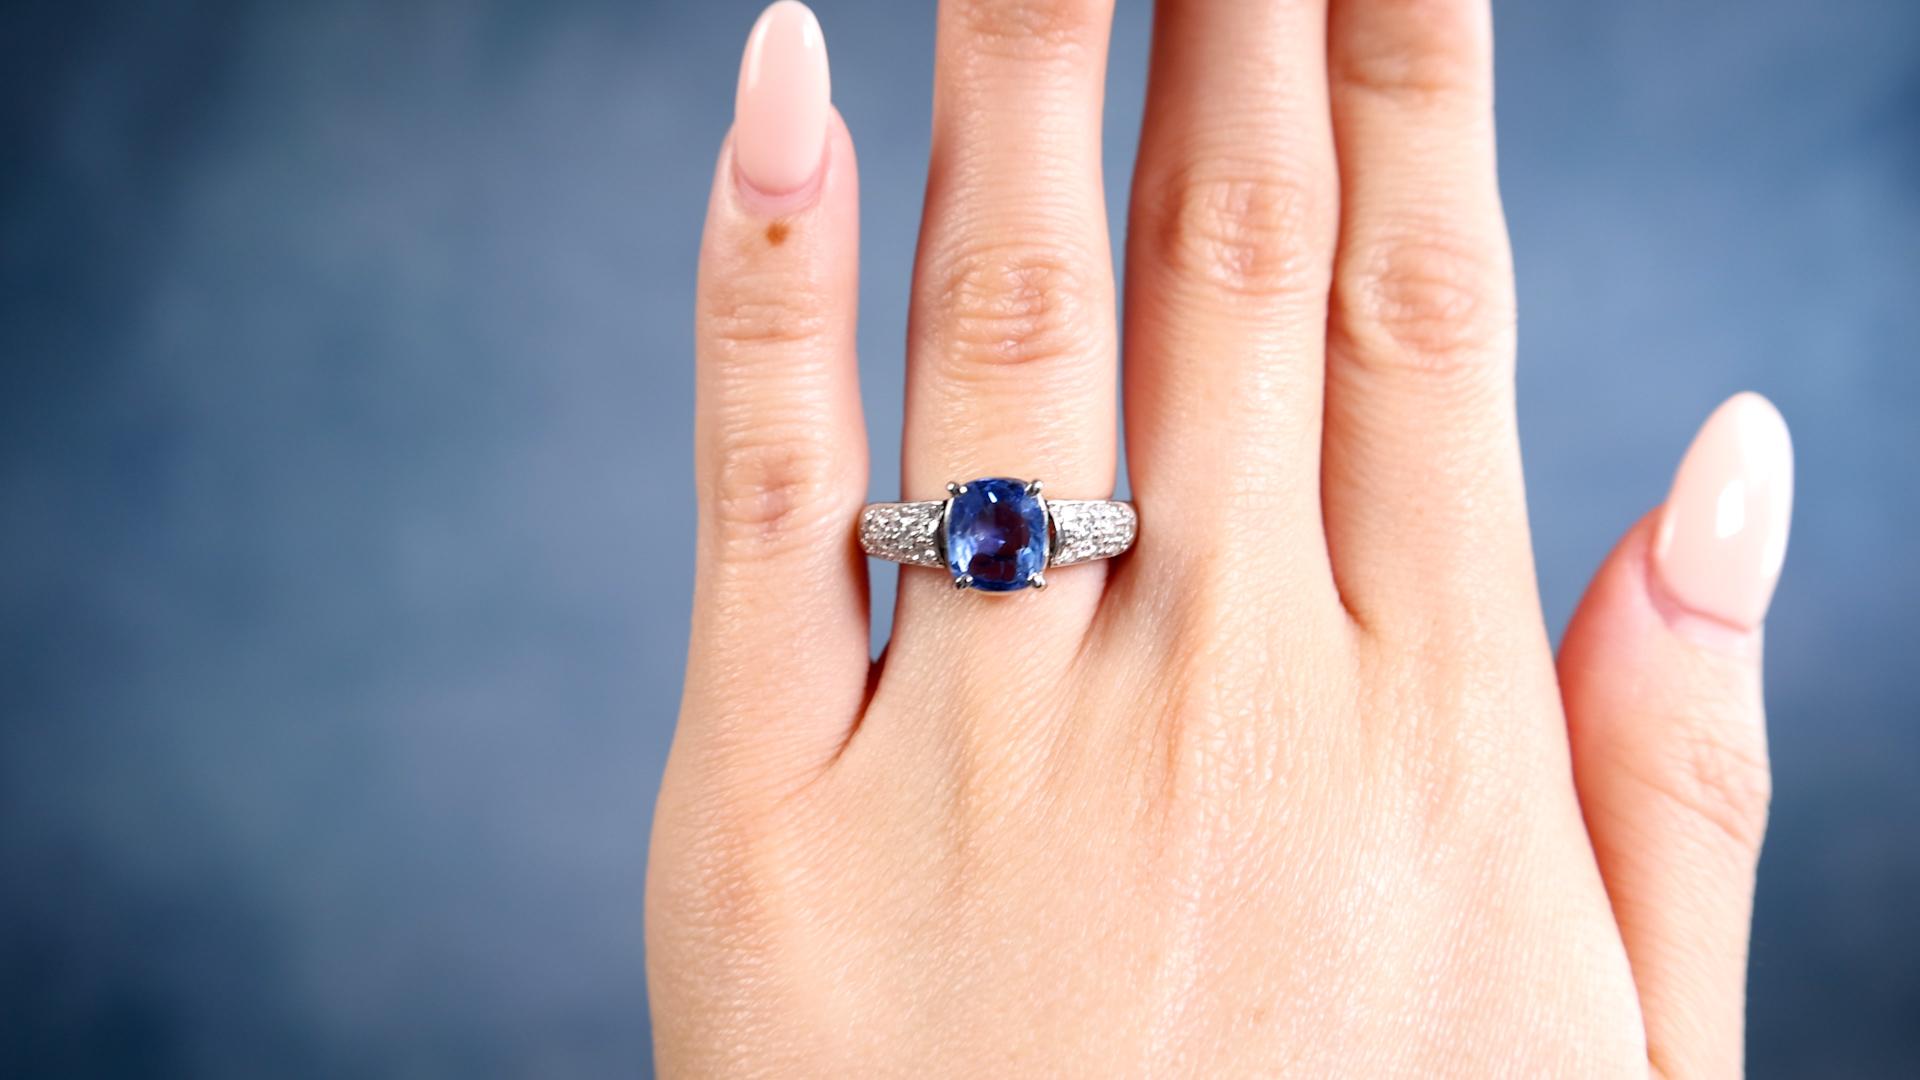 One Vintage Sapphire Diamond Platinum Ring. Featuring one cushion mixed cut sapphire of 2.21 carats. Accented by 18 round brilliant cut diamonds with a total weight of 0.30 carat, graded H-I color, VS clarity. Crafted in platinum with purity mark